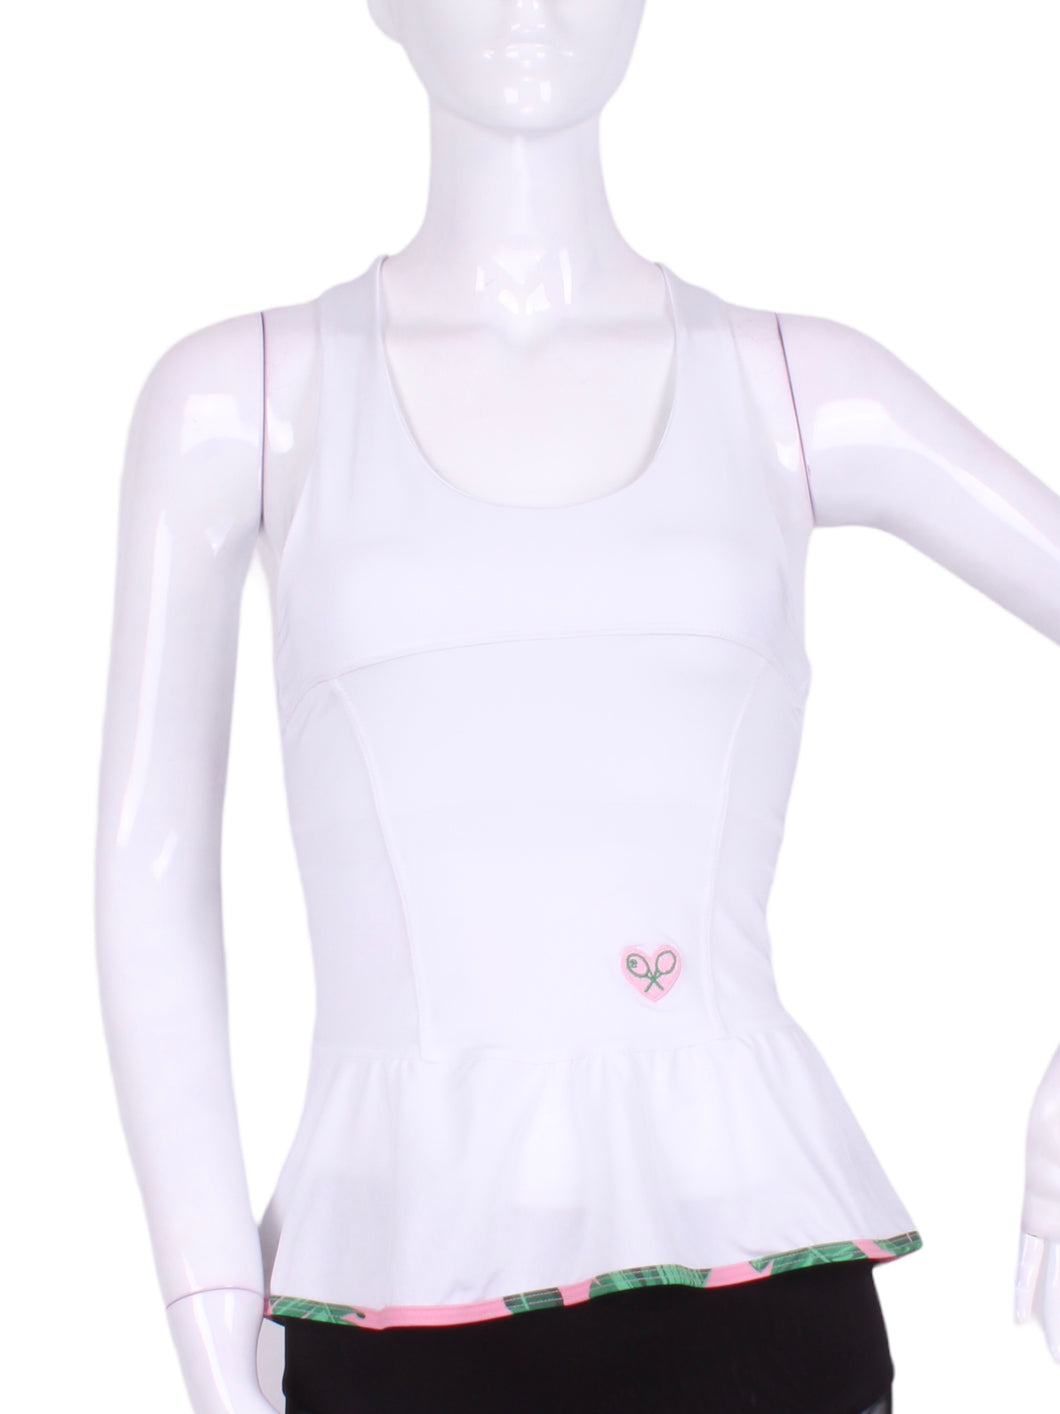 White Ruffle Tank Tennis Top with Pink and Green Trim - I LOVE MY DOUBLES PARTNER!!!